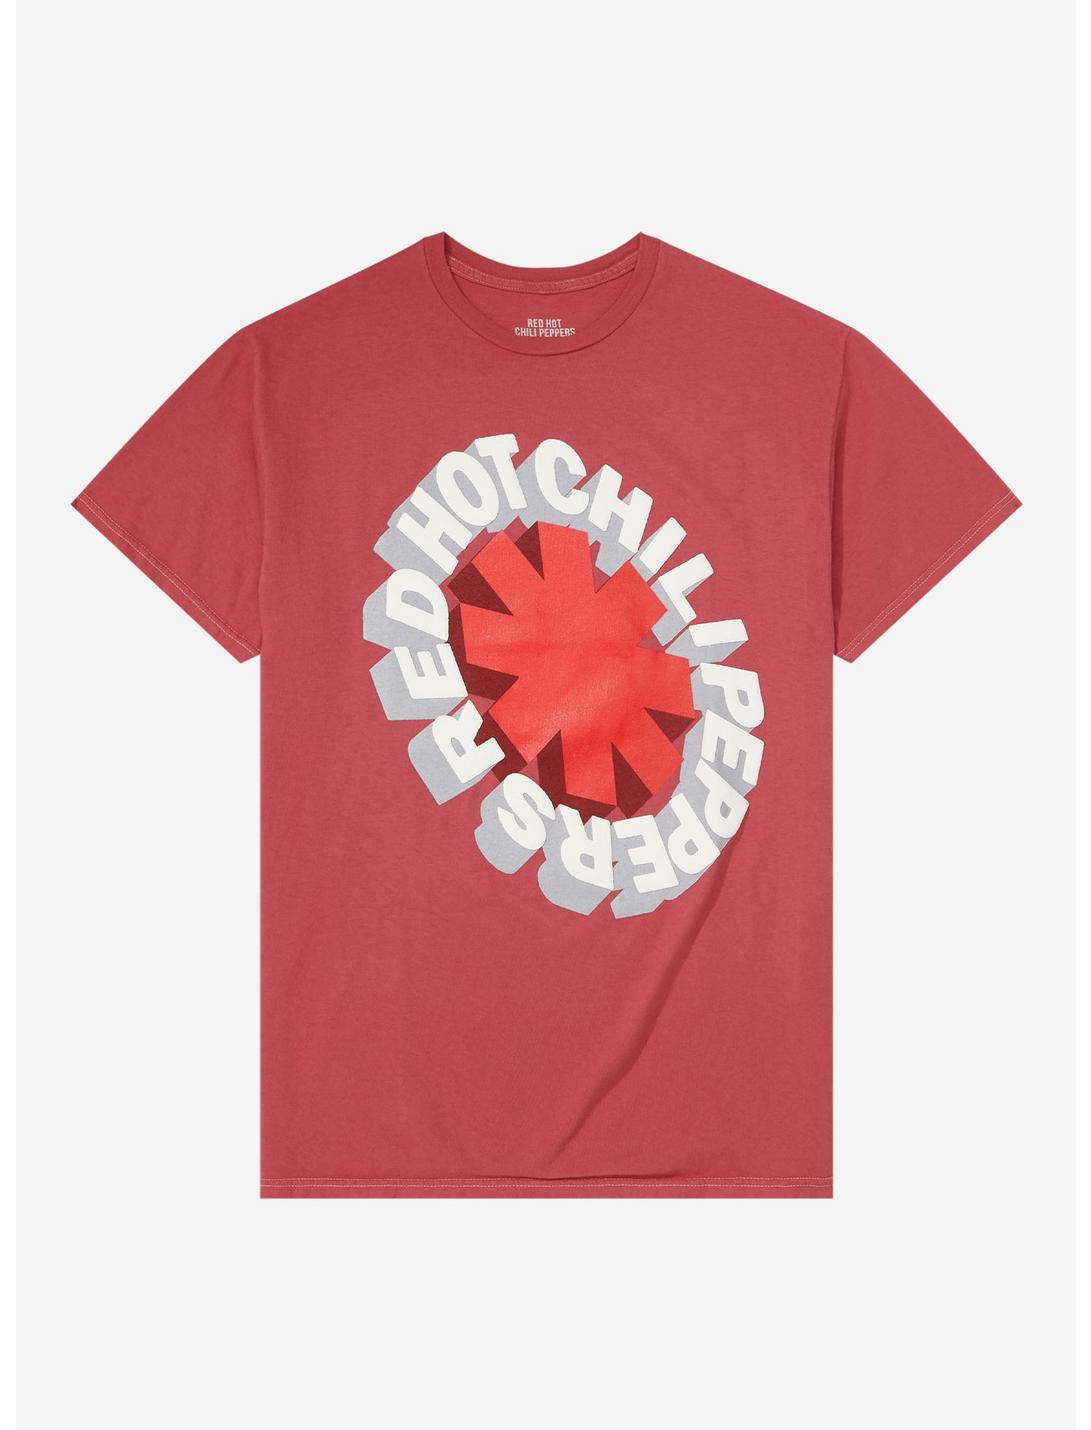 Red Hot Chili Peppers Puff Paint Logo T-Shirt, RED, hi-res